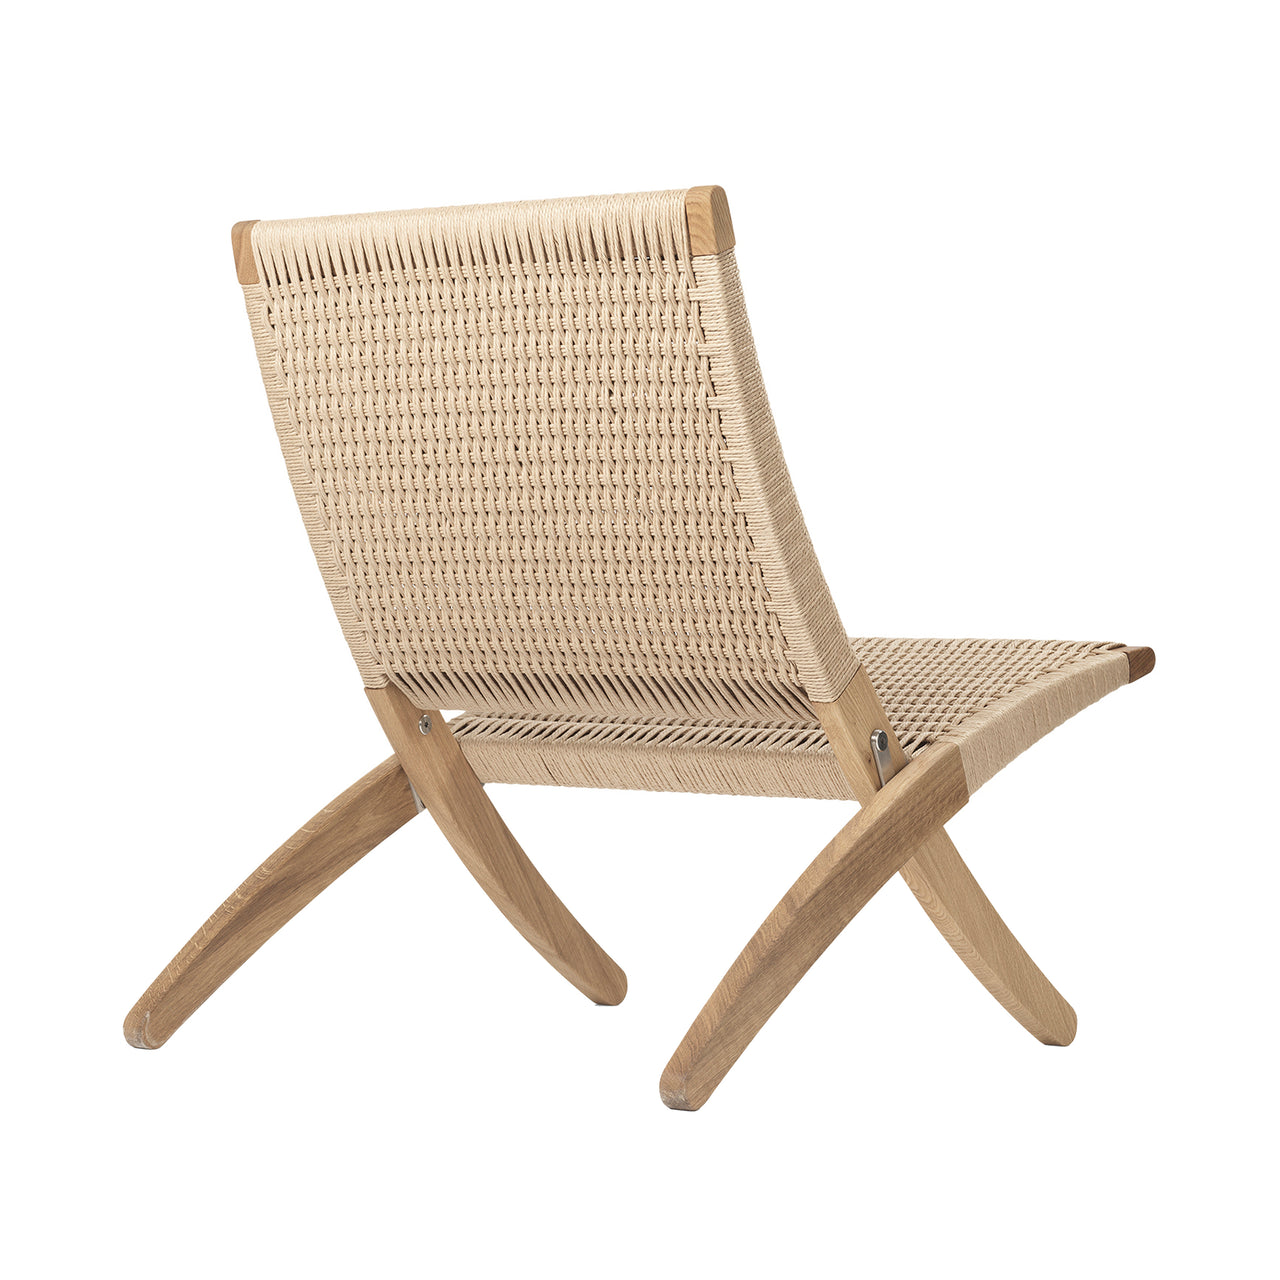 MG501 Outdoor Cuba Chair: Paper Cord + Oiled Oak